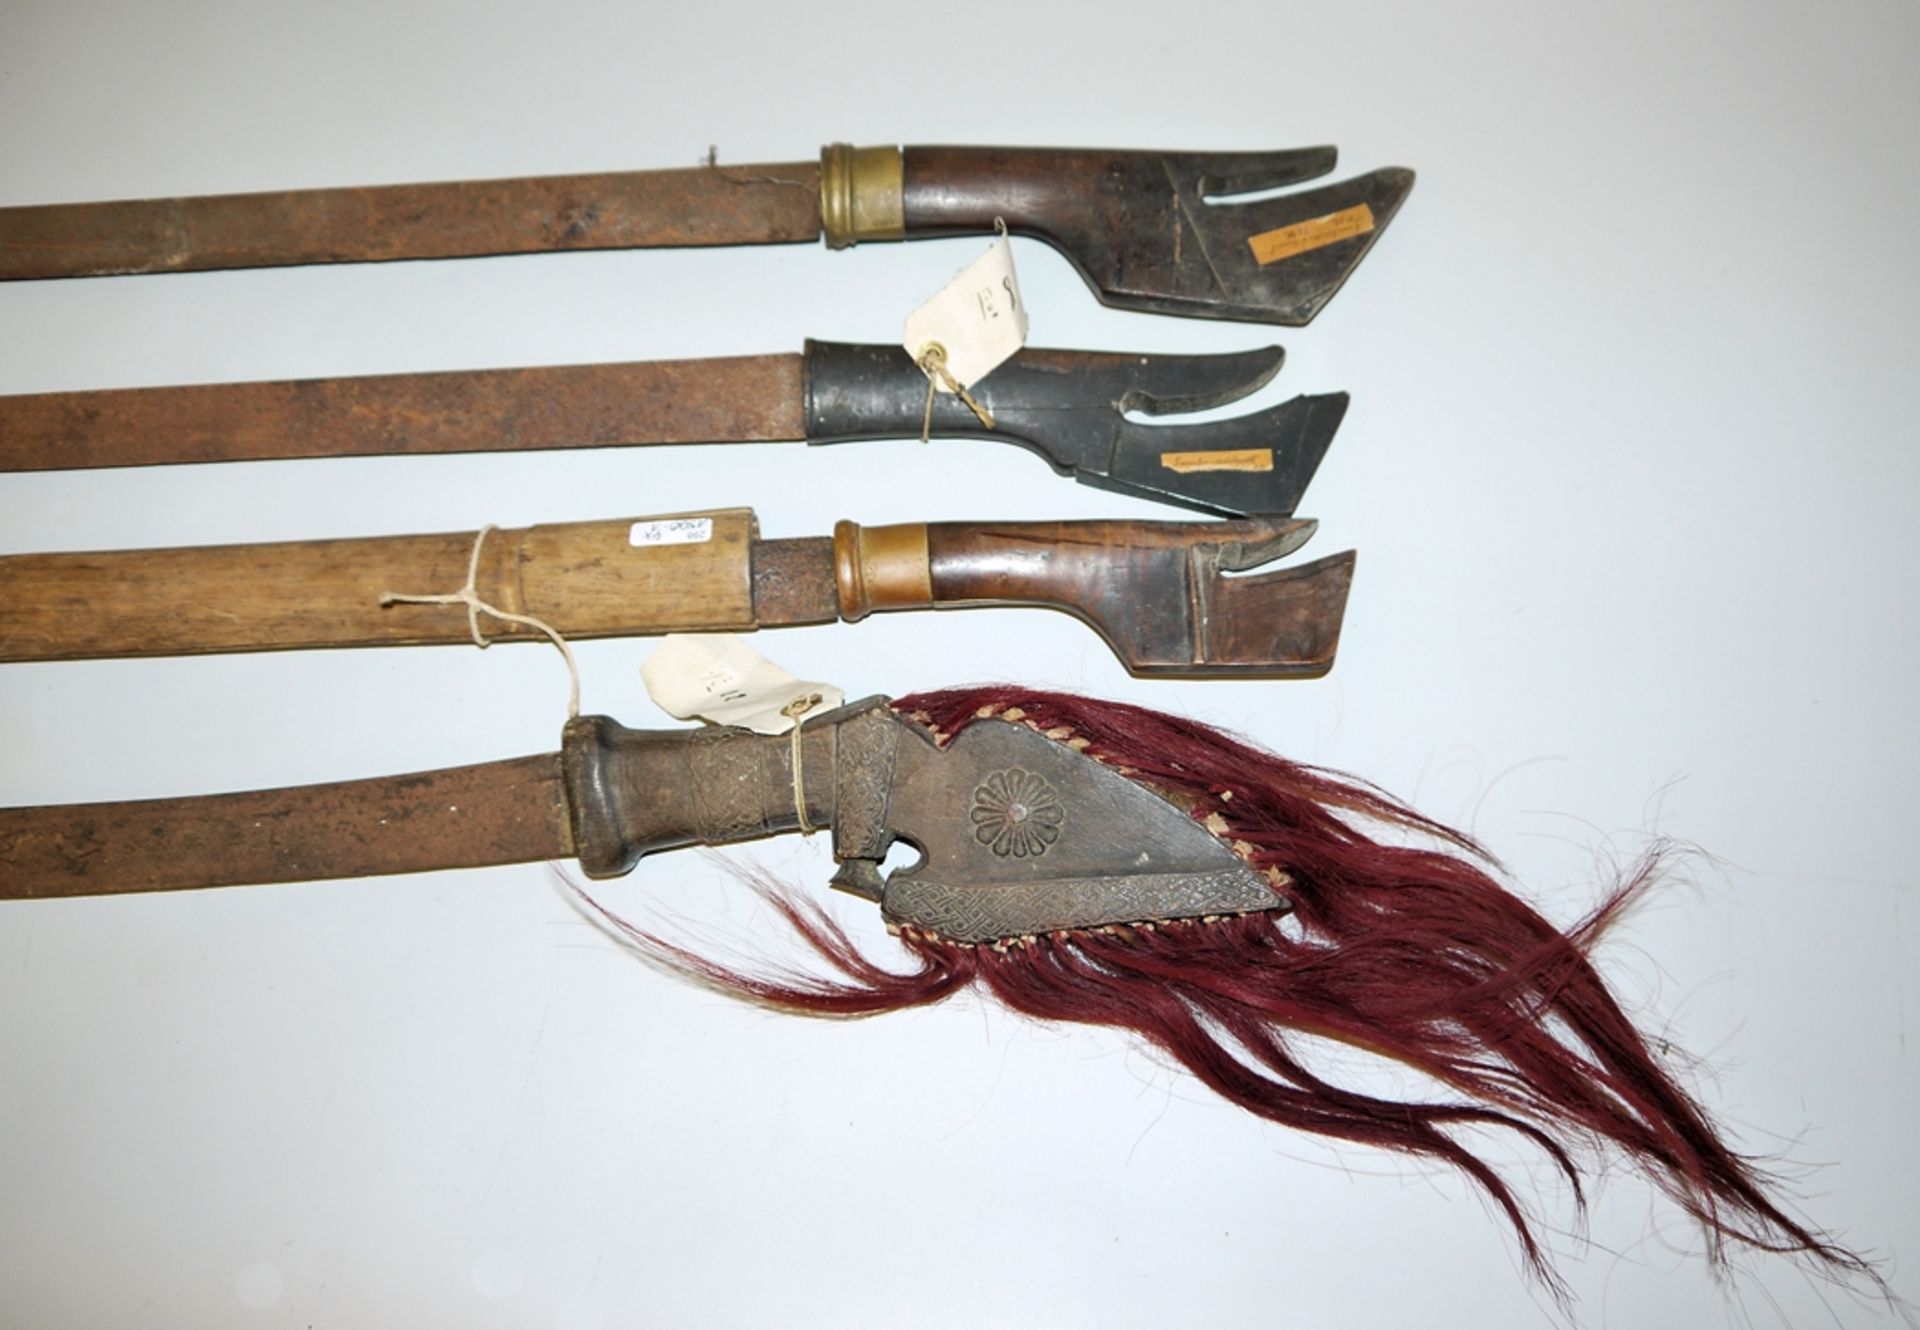 Four traditional Indonesian swords from Timor and Sulawesi 19th cent. - Image 2 of 2